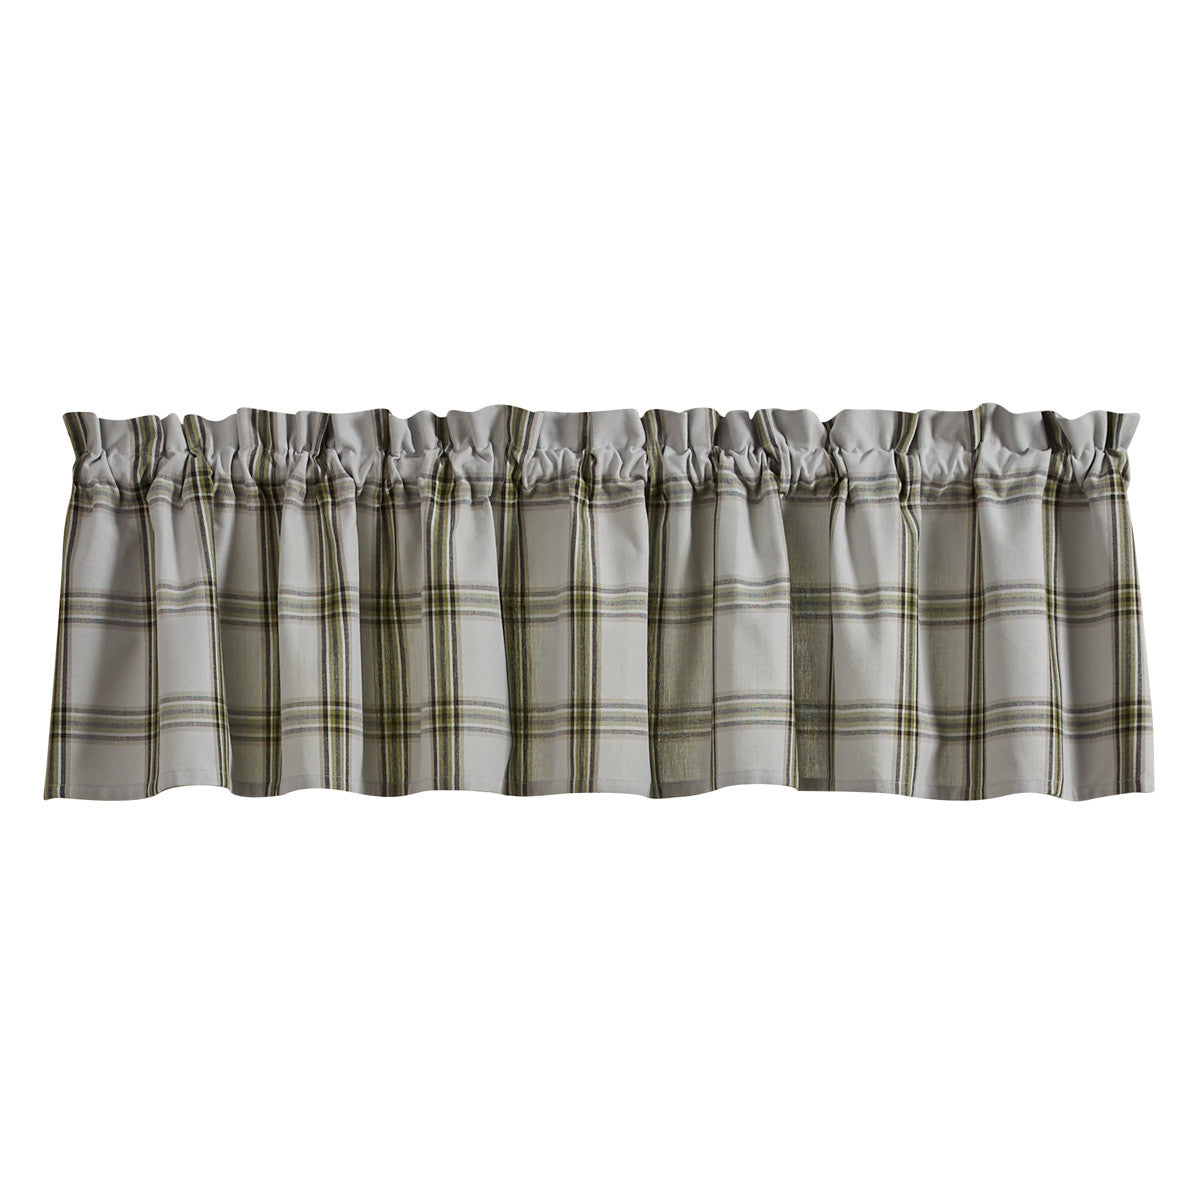 Park Timberline Unlined Valance 72 x 14 Inches Country, Farmhouse, Rustic, Cabin, Plaid